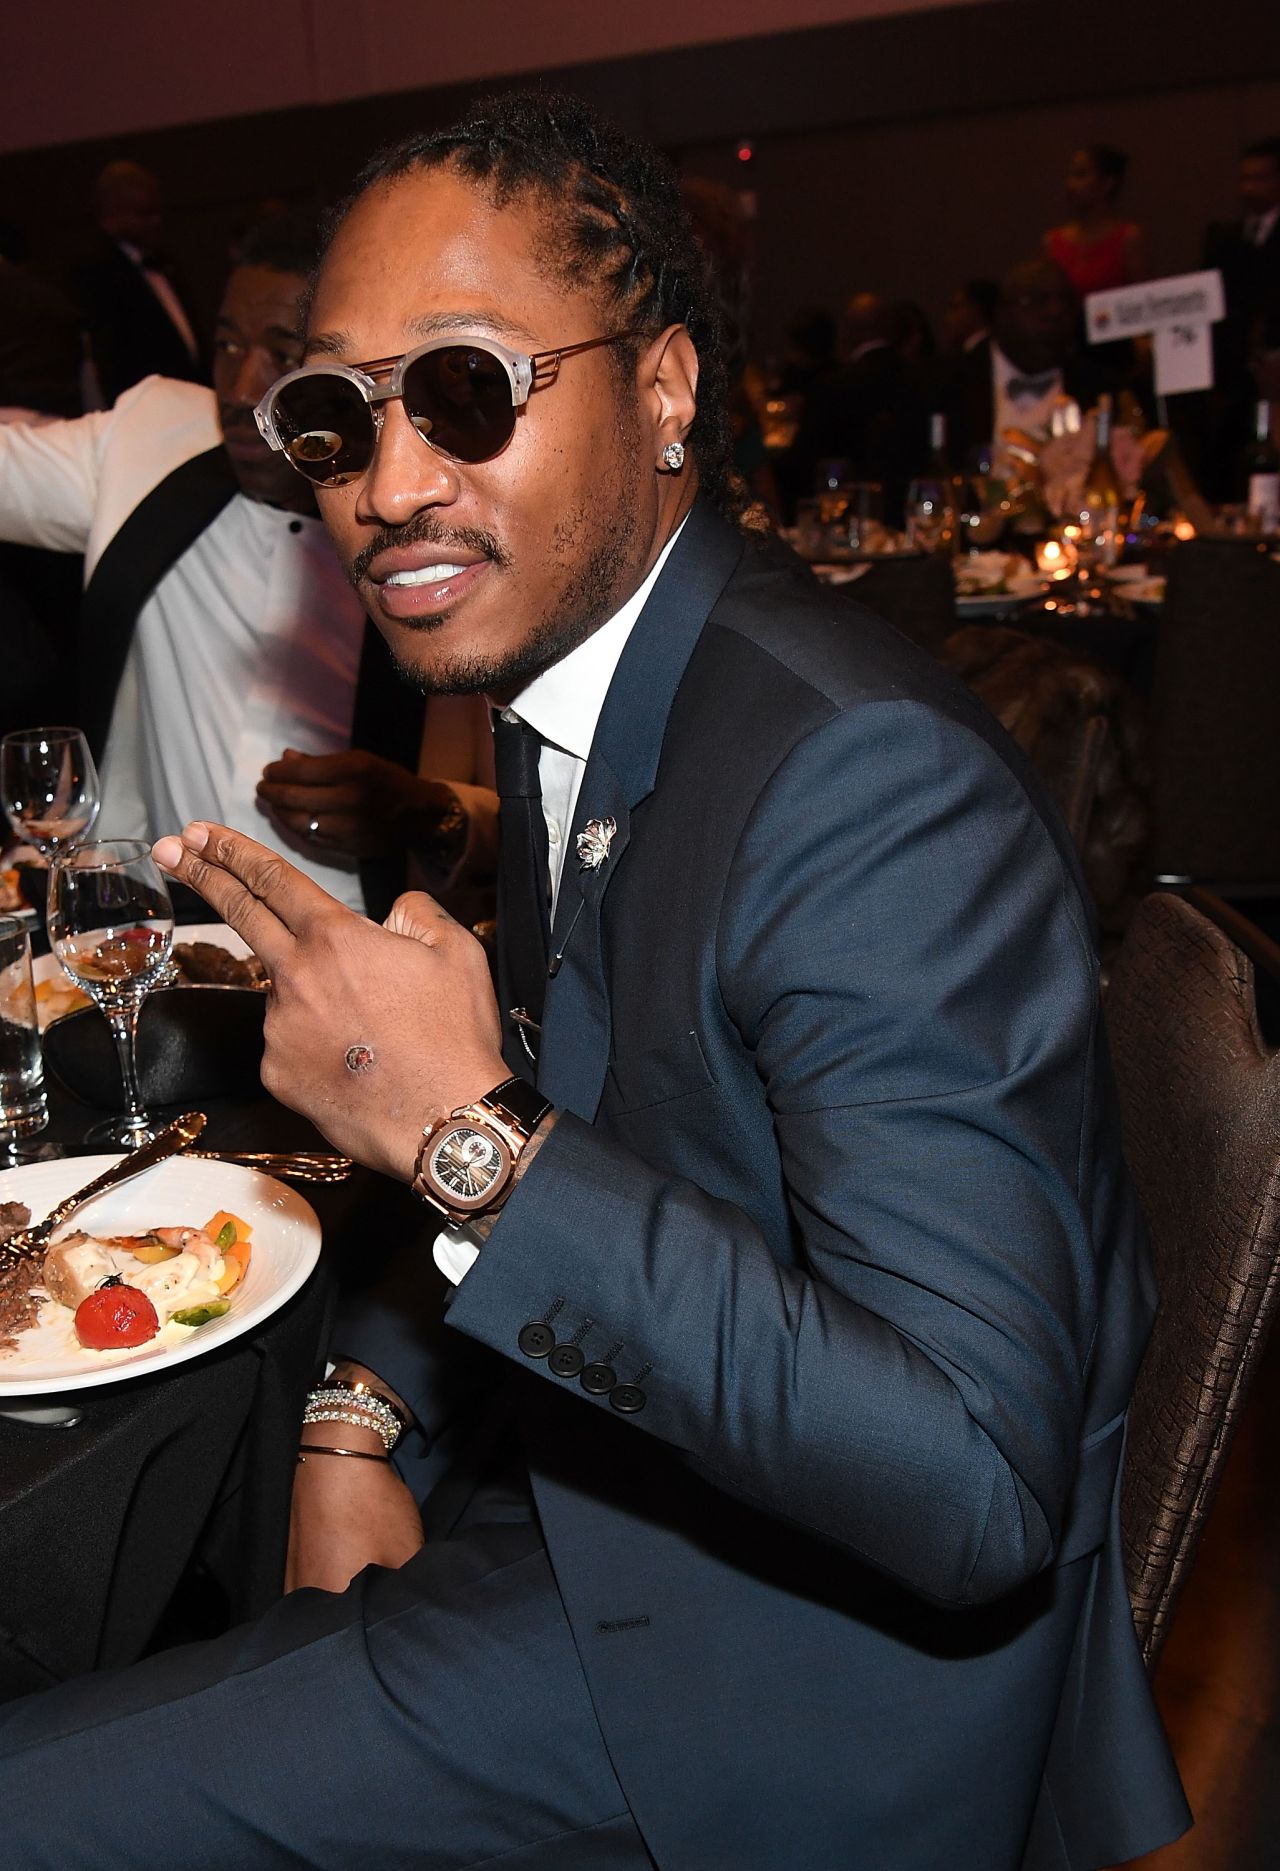 Rapper Future sports a Patek Philippe watch at the UNCF Mayor's Masked Ball in 2016.